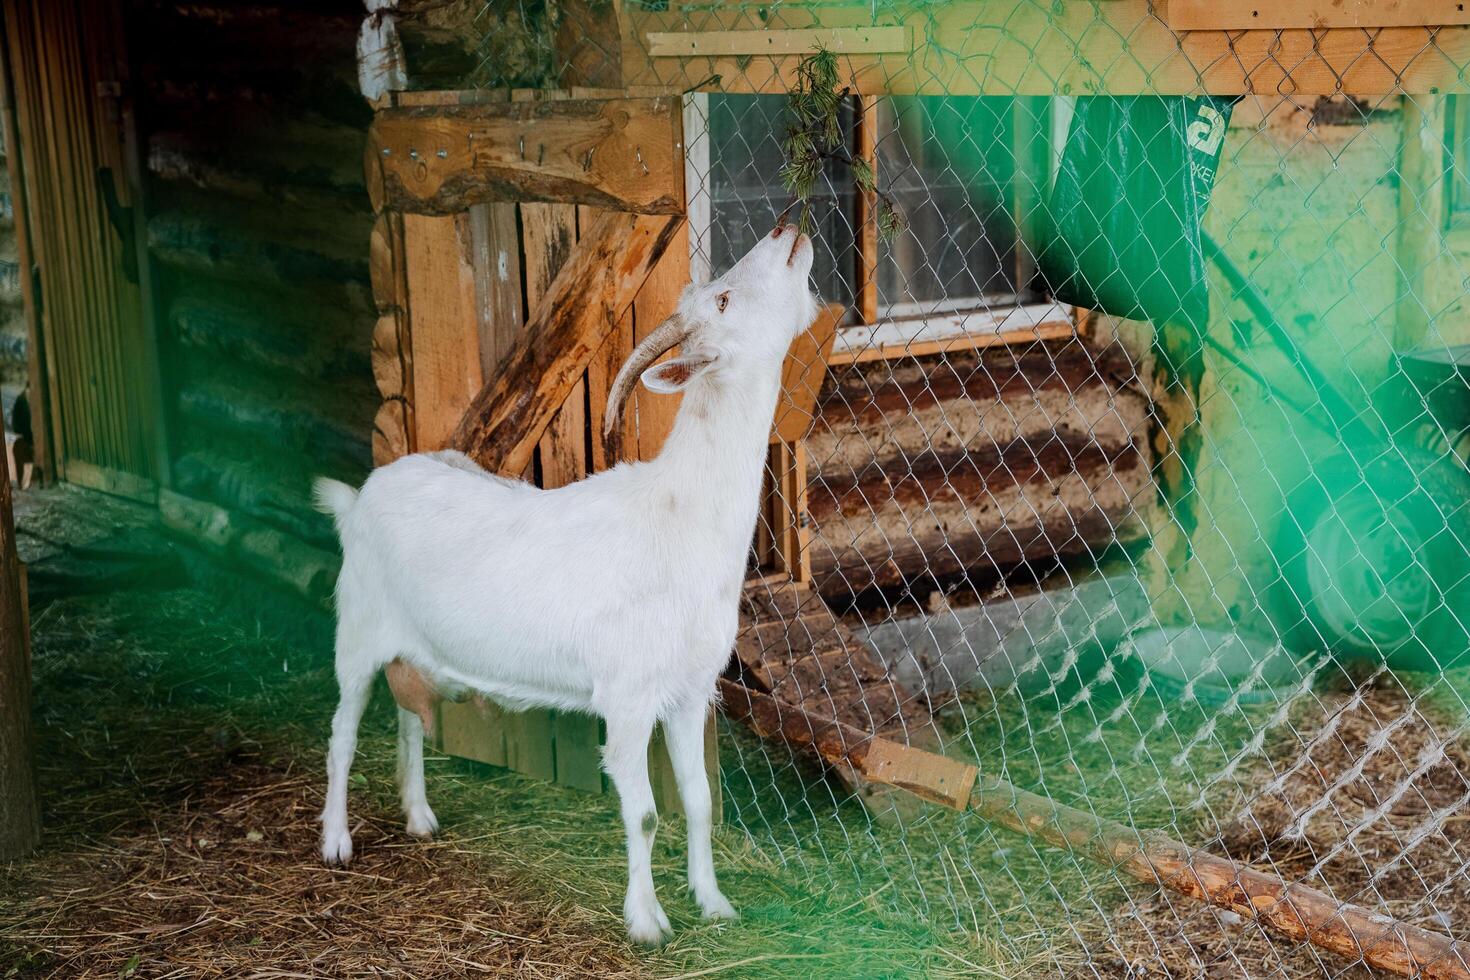 A white goat pulls its head up, a pet stands in a pen, cattle, a white goat, agriculture, a goat asks for food. photo